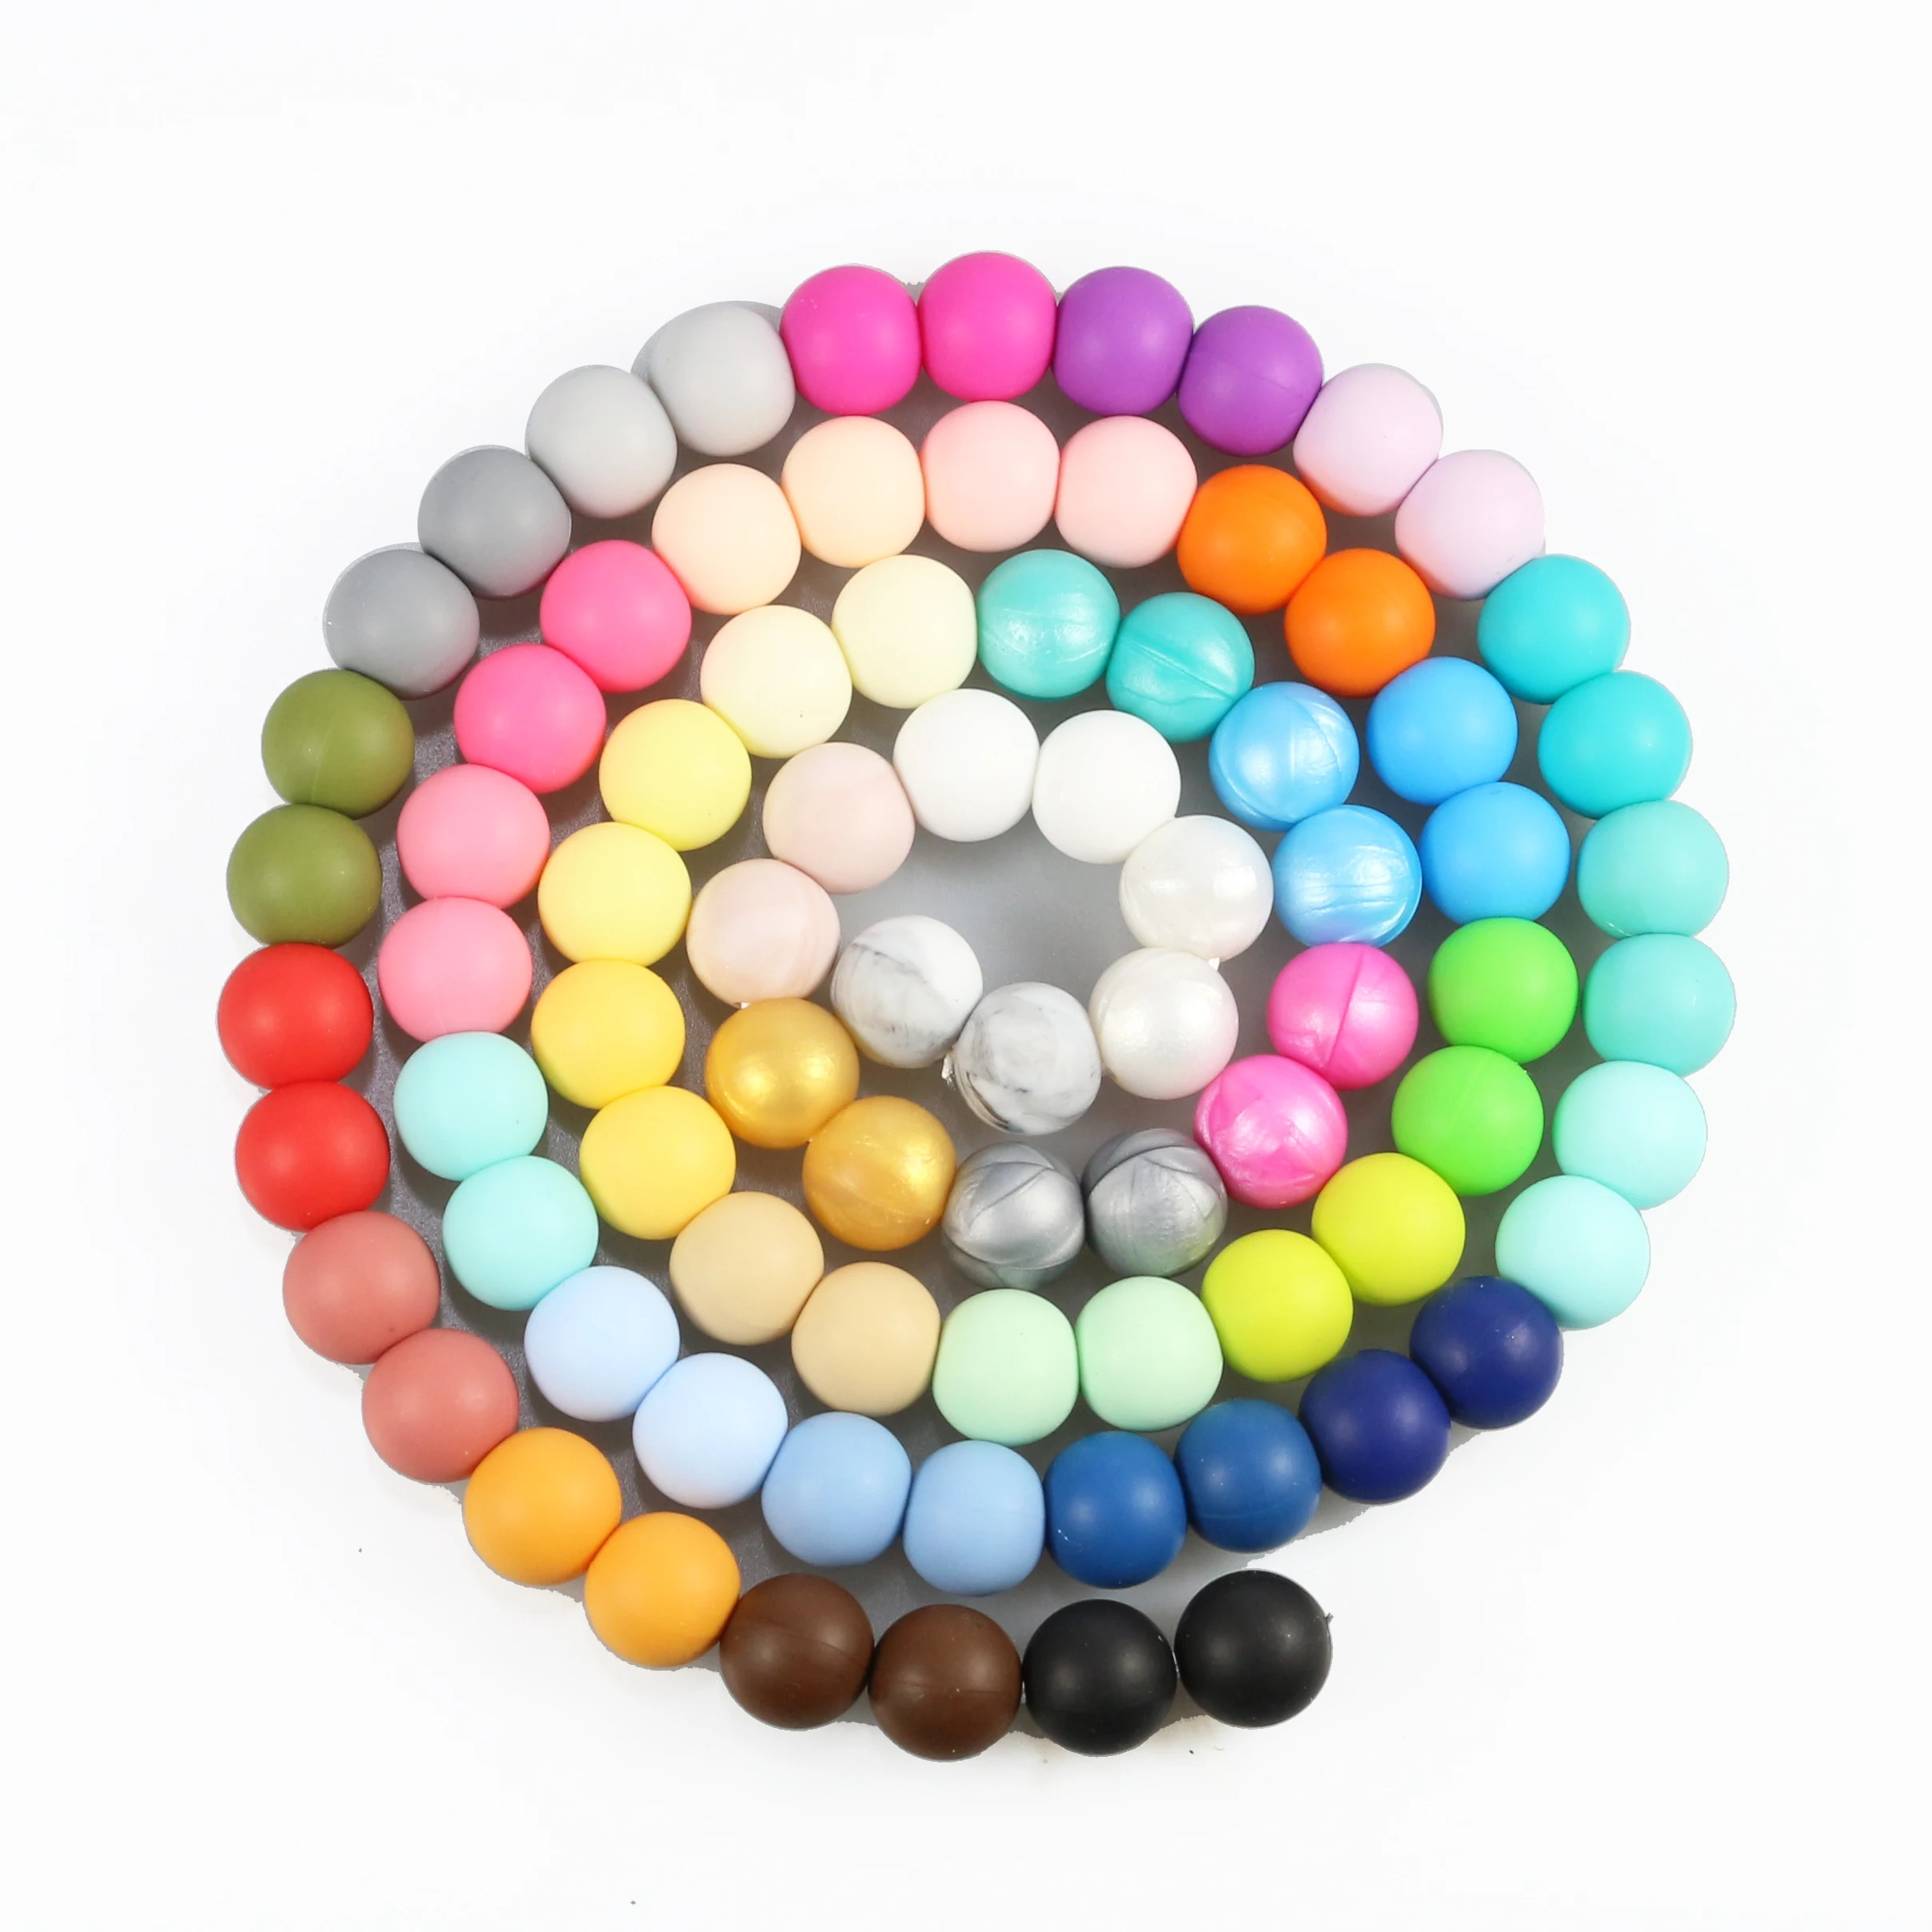 FDA Proof Bpa-free DIY Silicone Teething loose Beads with Baby safe Jewelry 